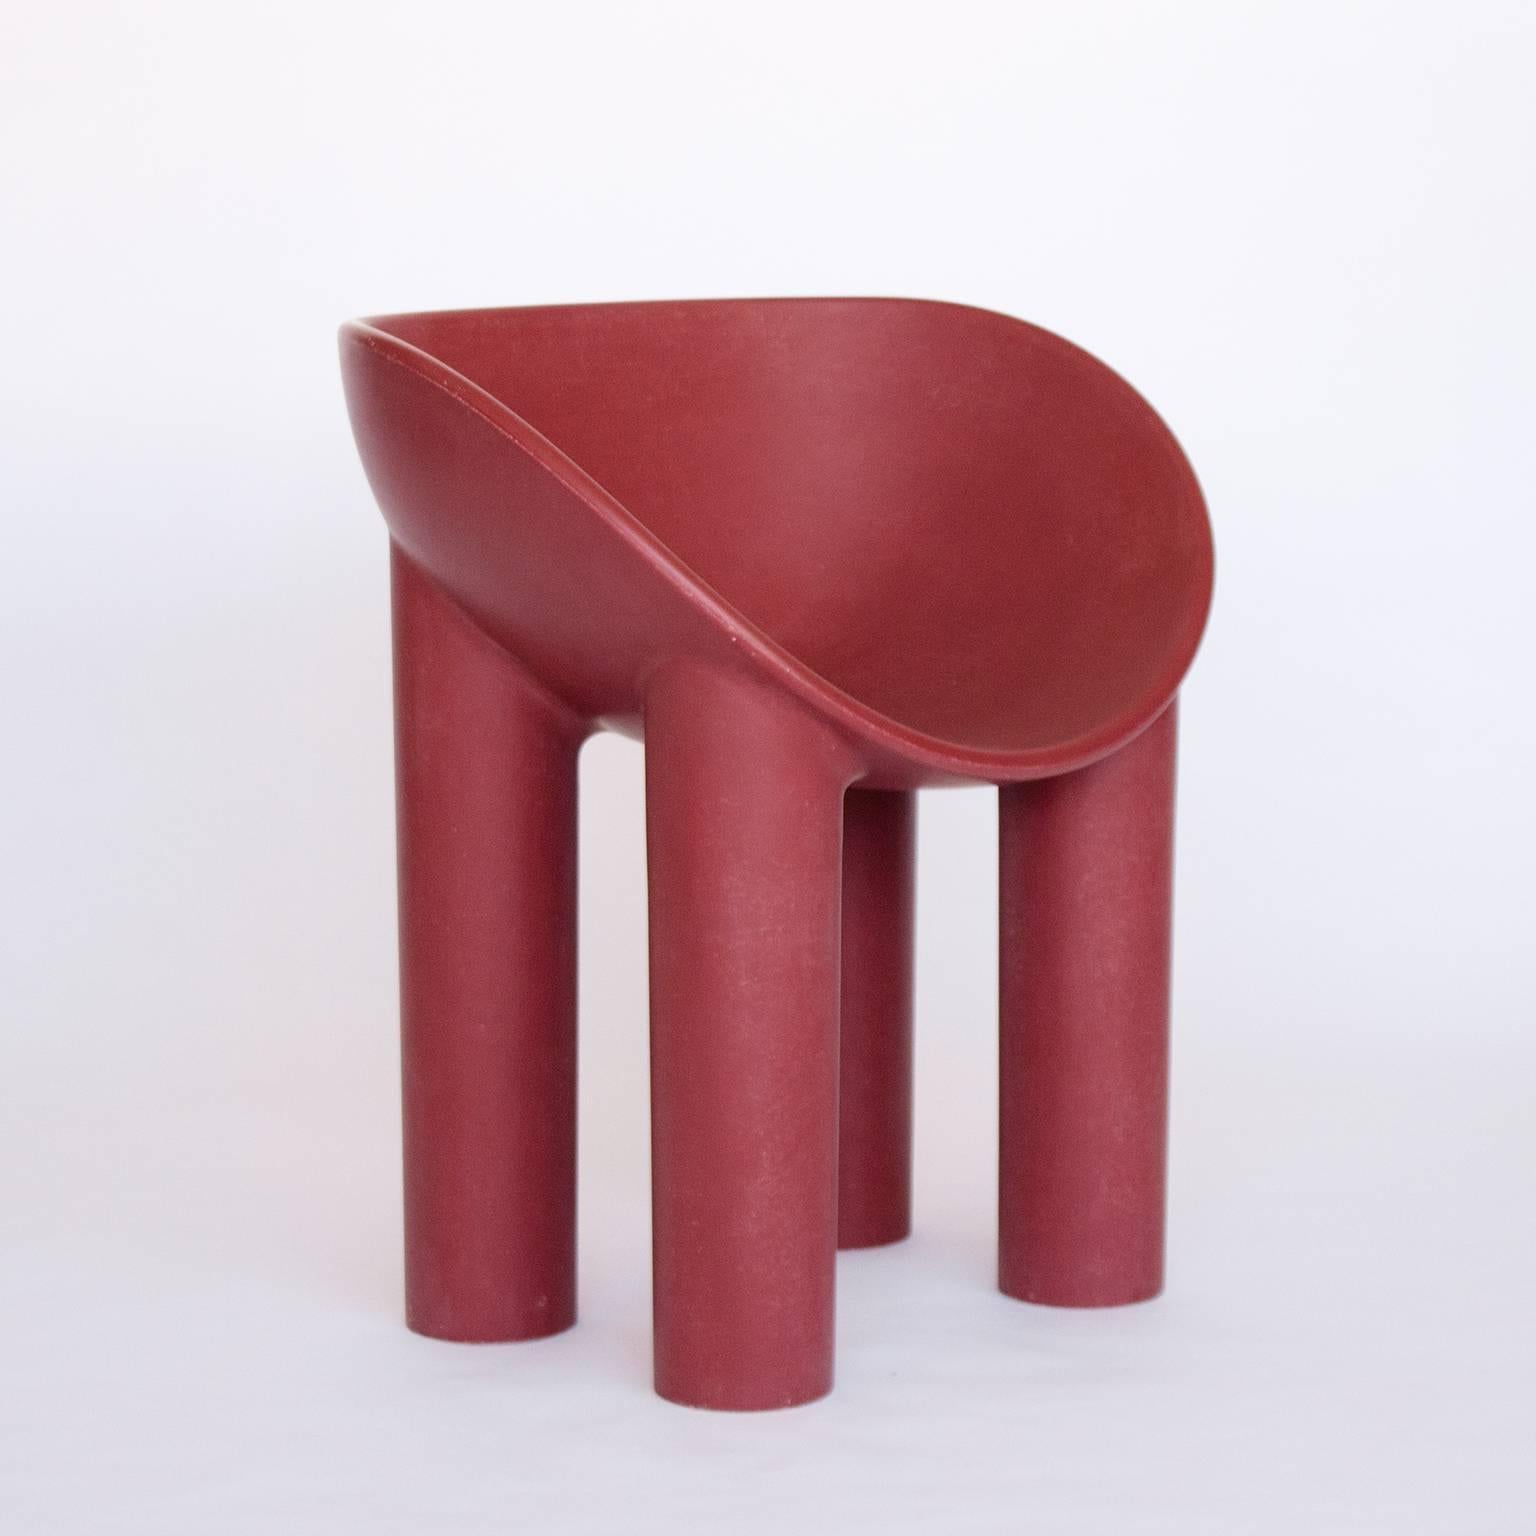 Faye Toogood

One piece currently available. Other colors are available by special order with a production time of 7-8 weeks.

This scoop-seated chair with four plump legs is cast as a single piece of fiberglass. The translucent hue evokes